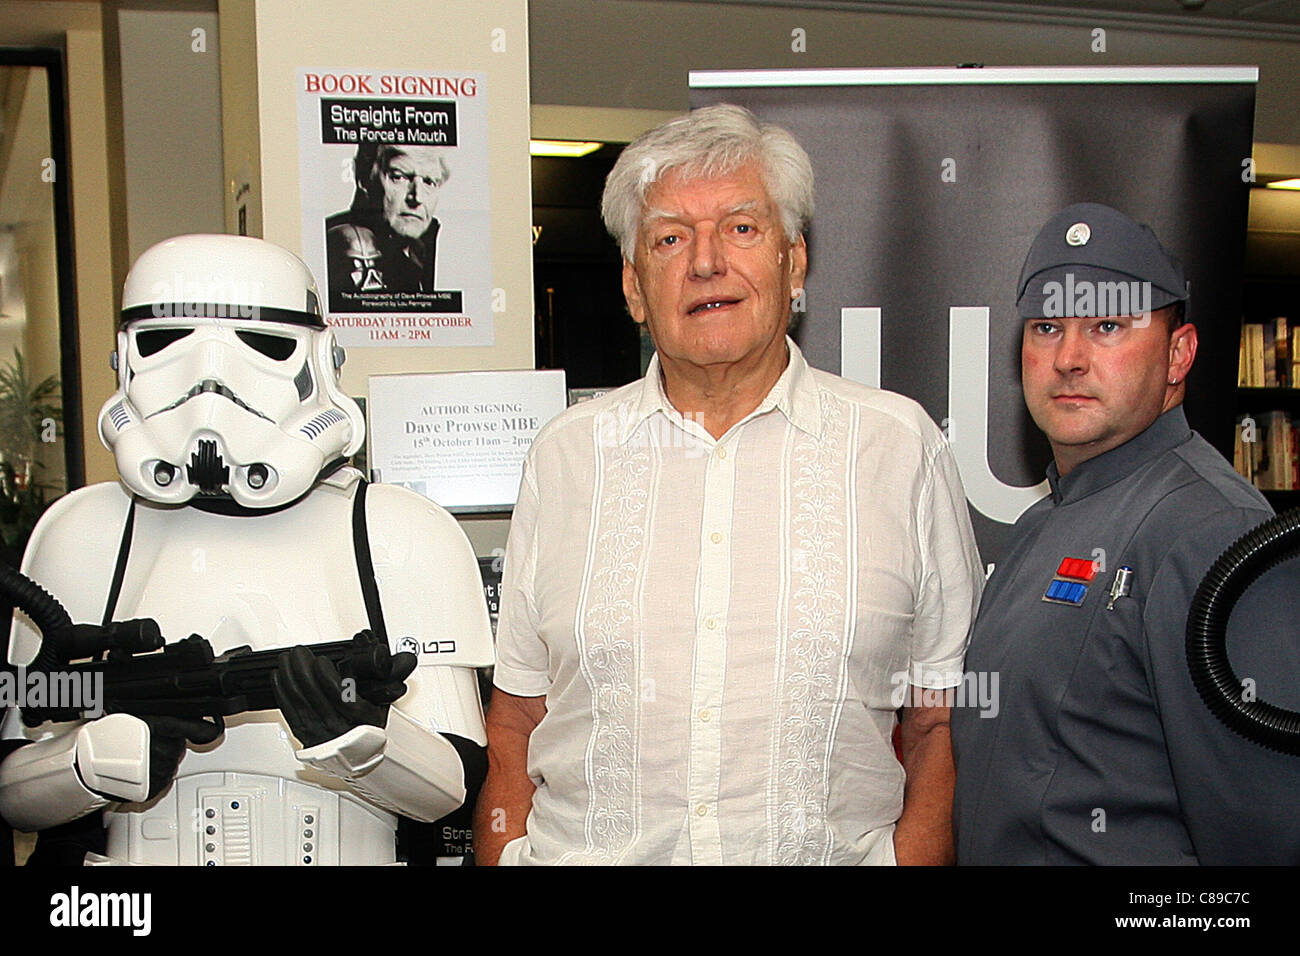 Star Wars actor Dave Prowse, who played Darth Vader, launches his autobiography 'Straight From the Force's Mouth' in Croydon, Surrey, UK, on Saturday, 15th October, 2011 Stock Photo